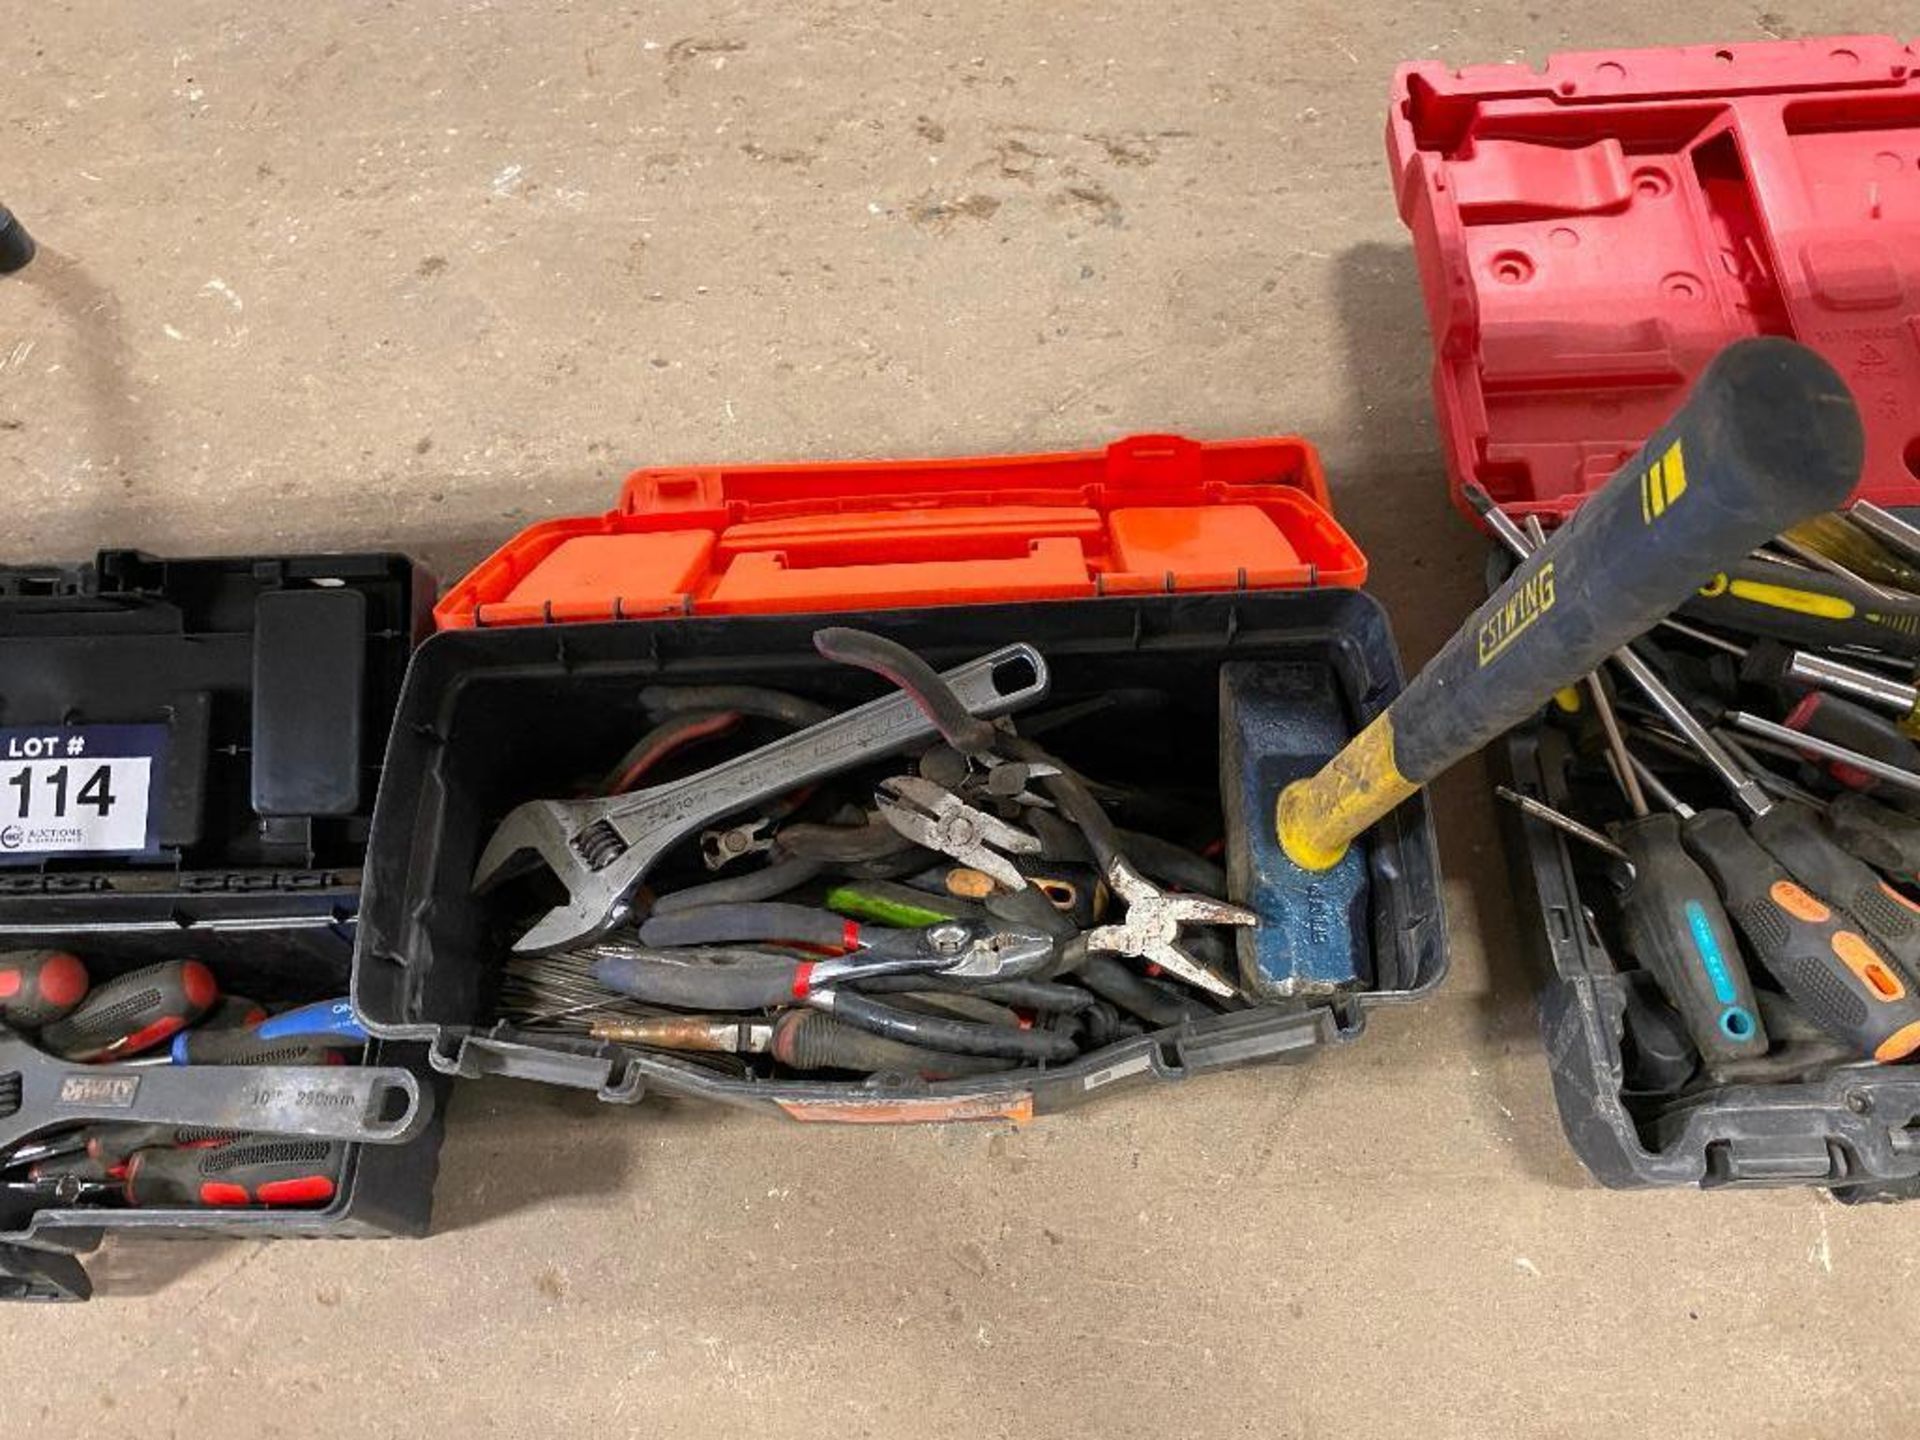 Tool Box w/ Asst. Tools including Pliers, Hammer, Tie Wire, Crescent Wrench, Cutters, etc.